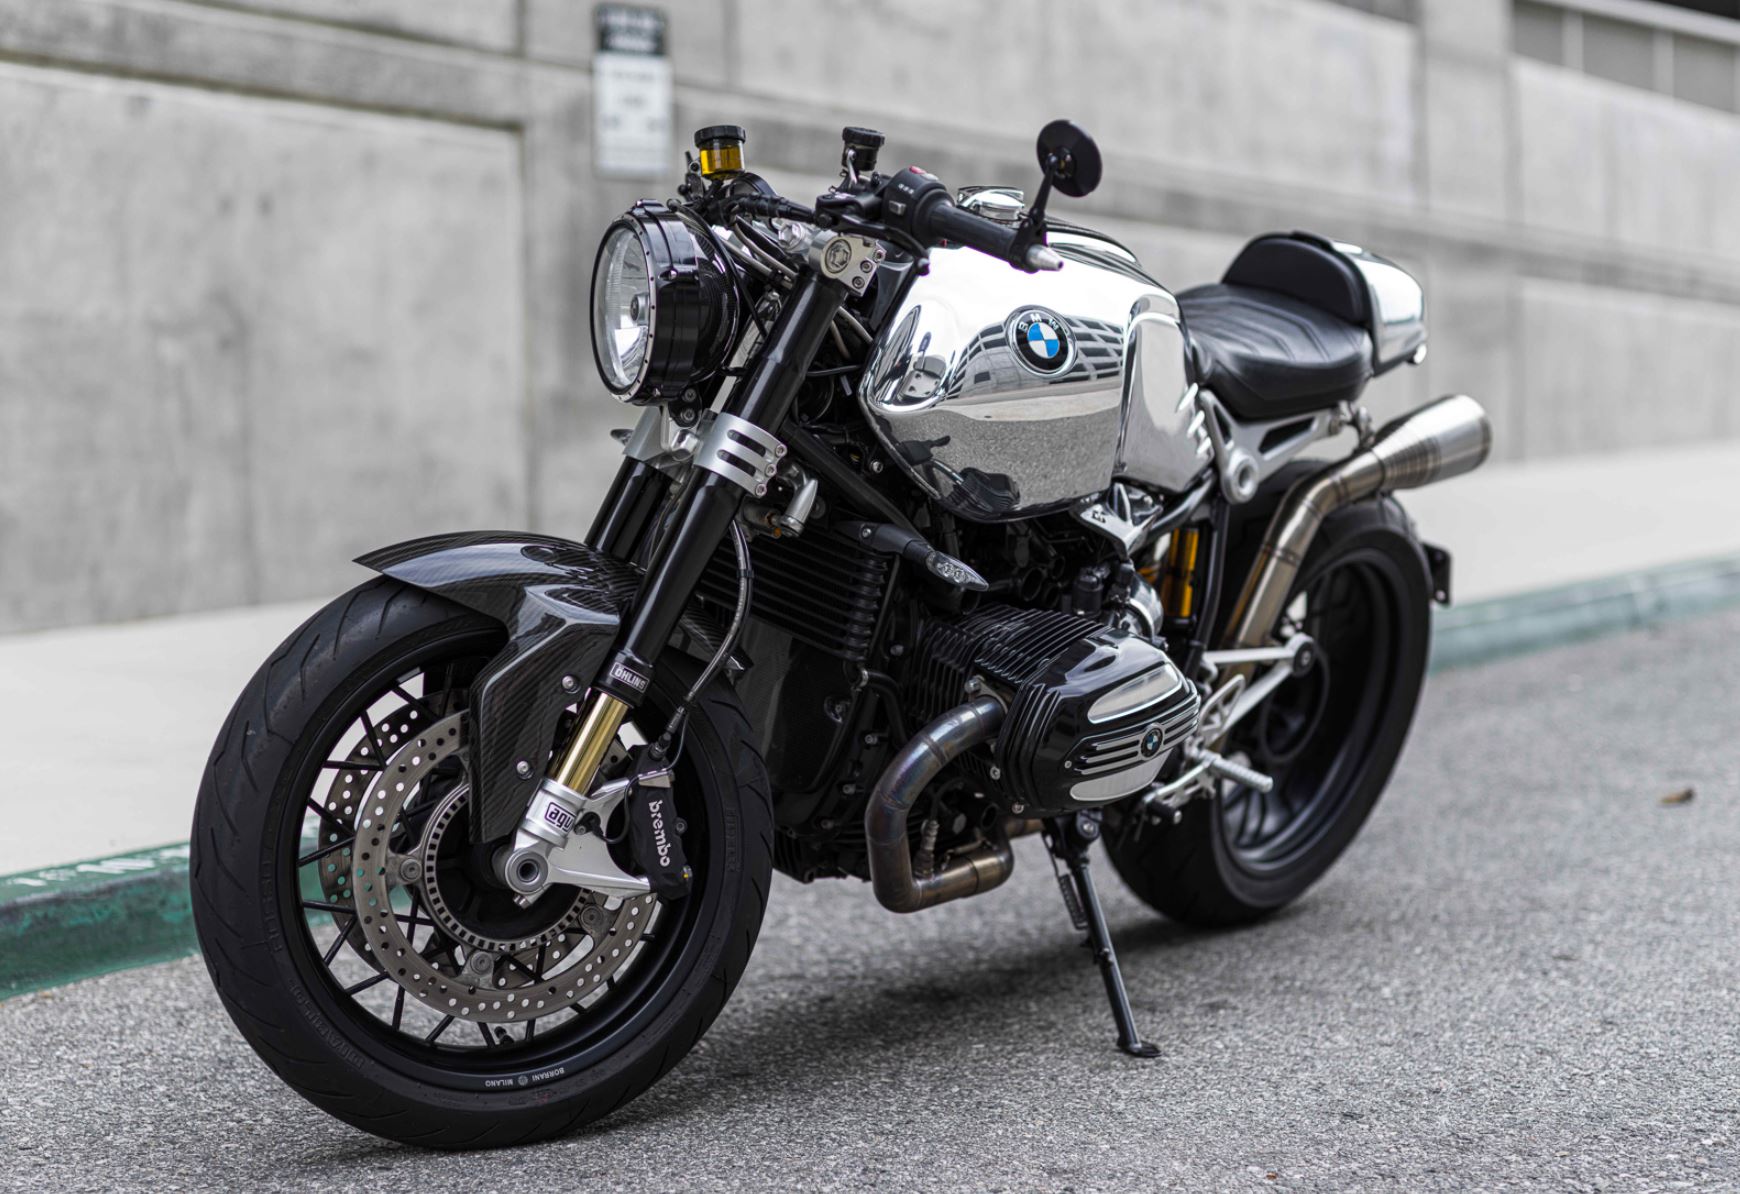 About the BMW R nineT